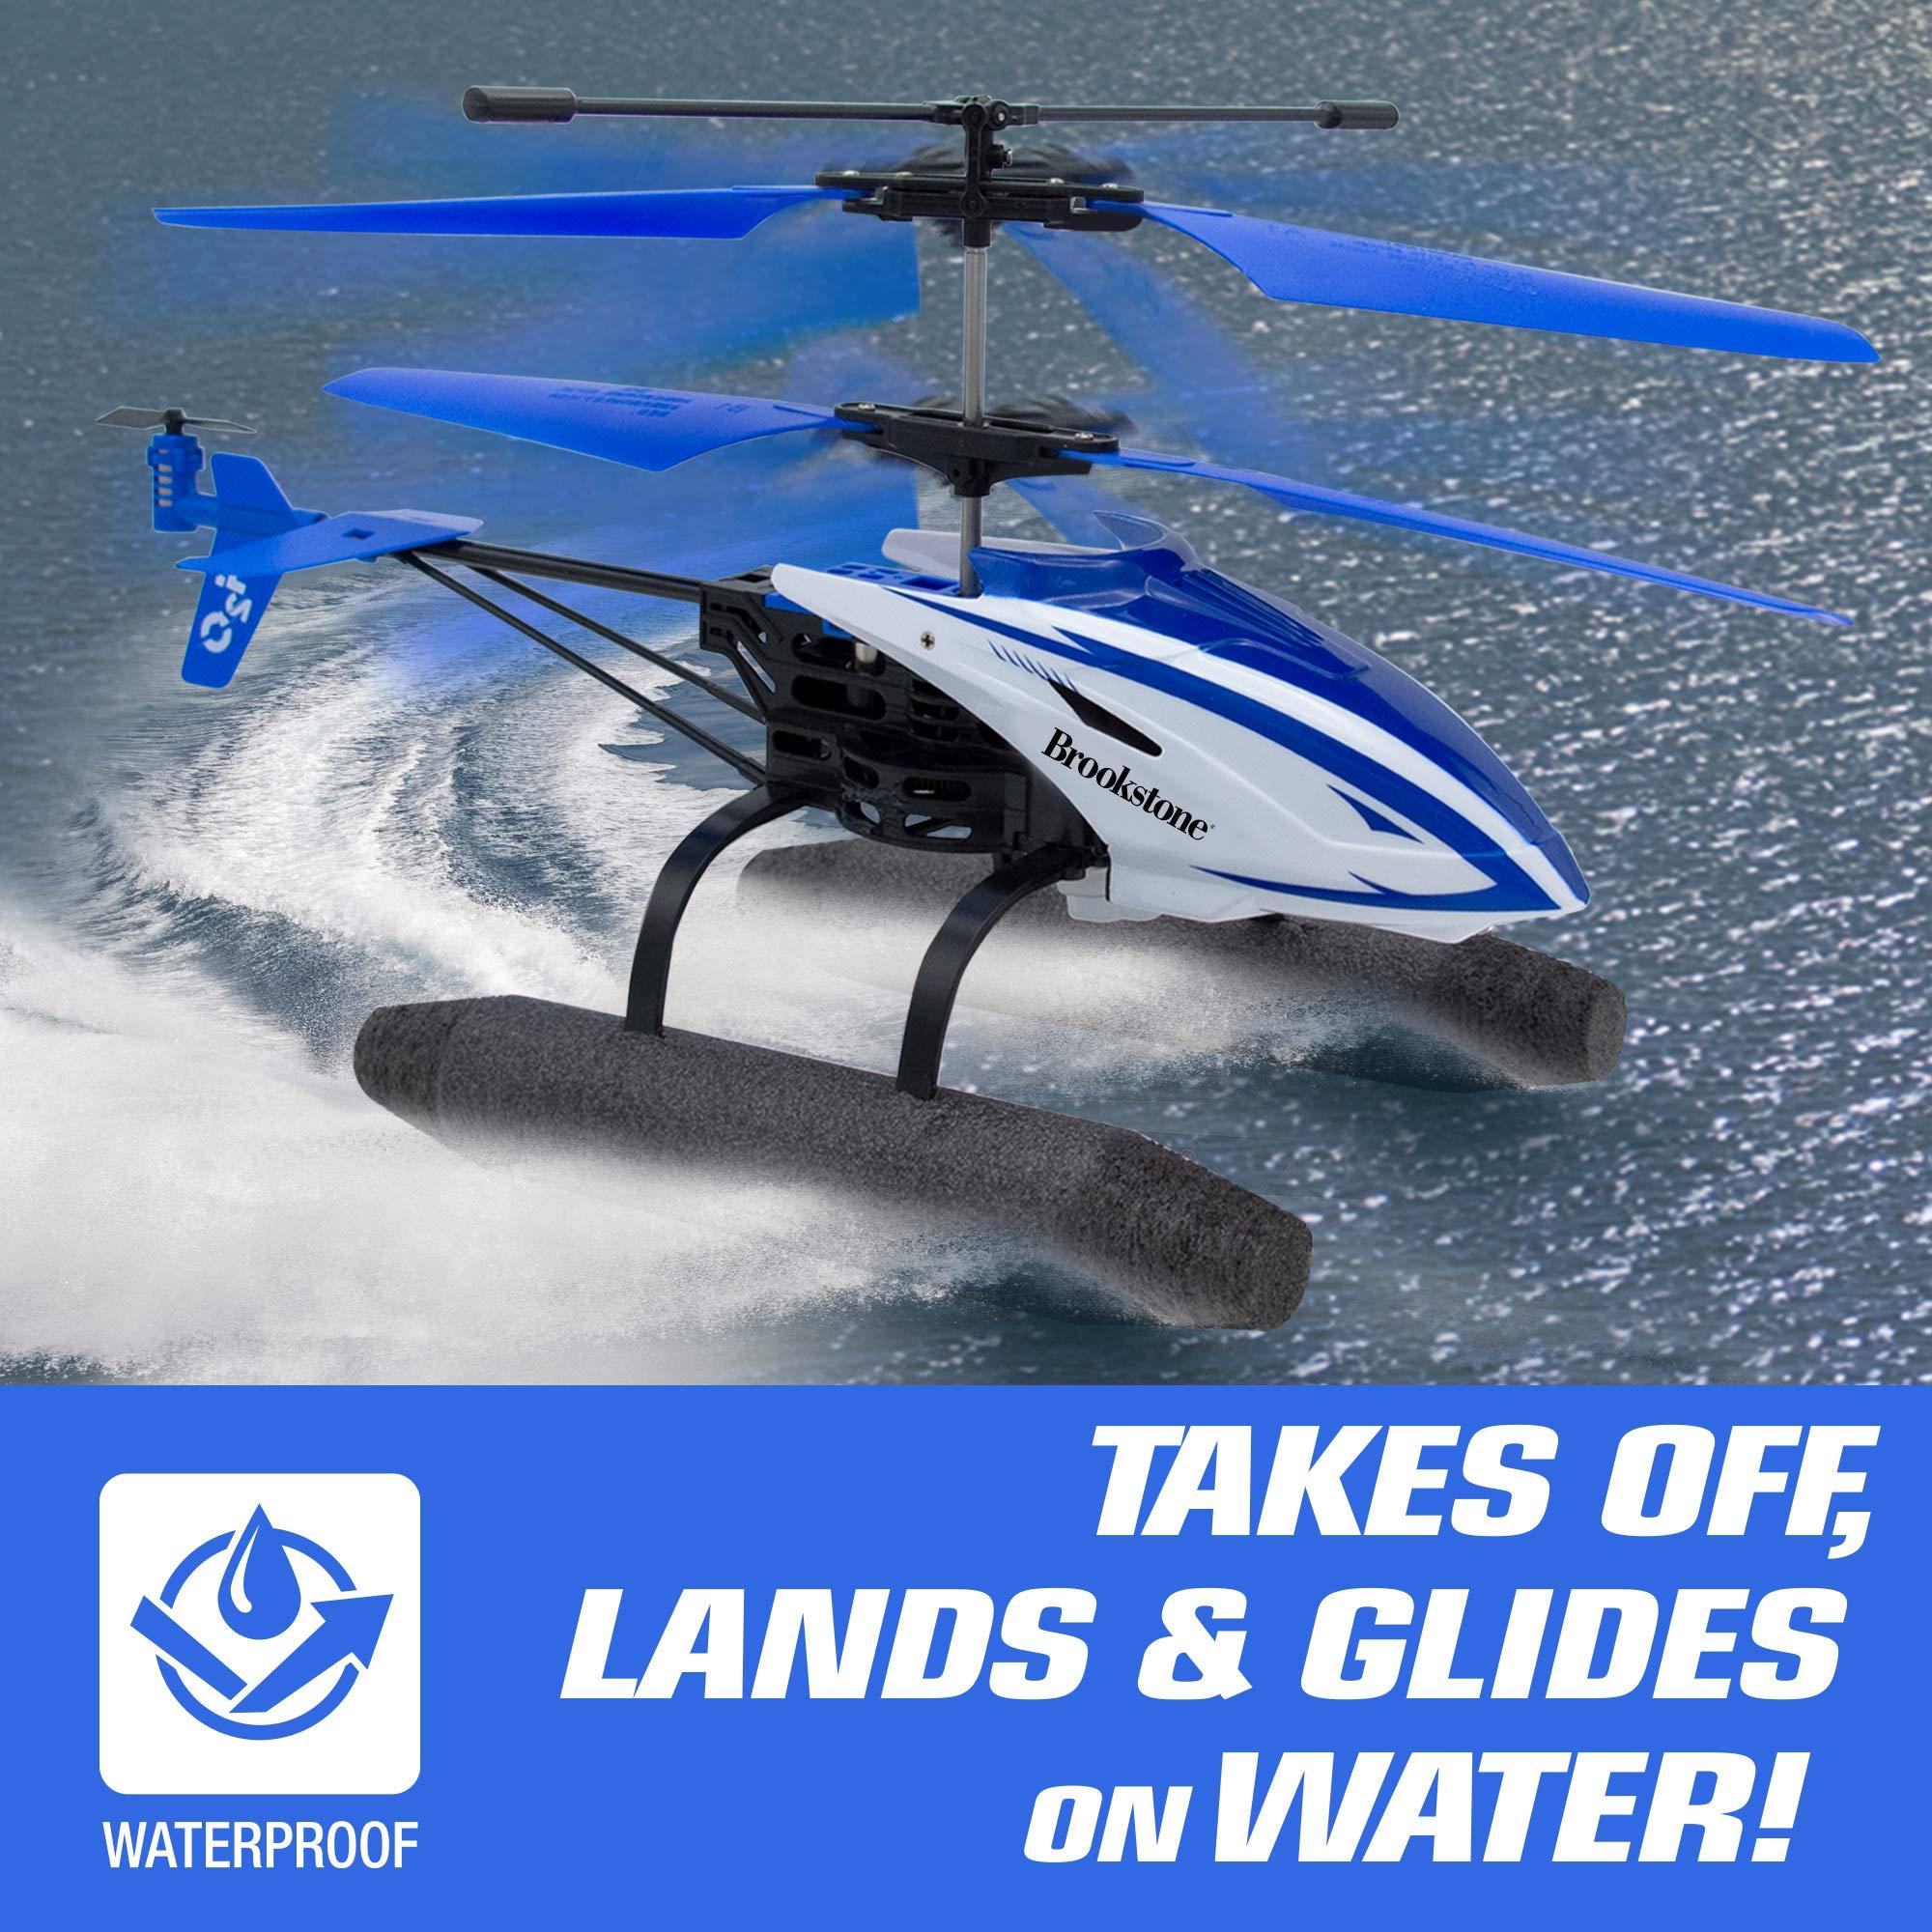 Remote Control Helicopter That Lands On Water: 